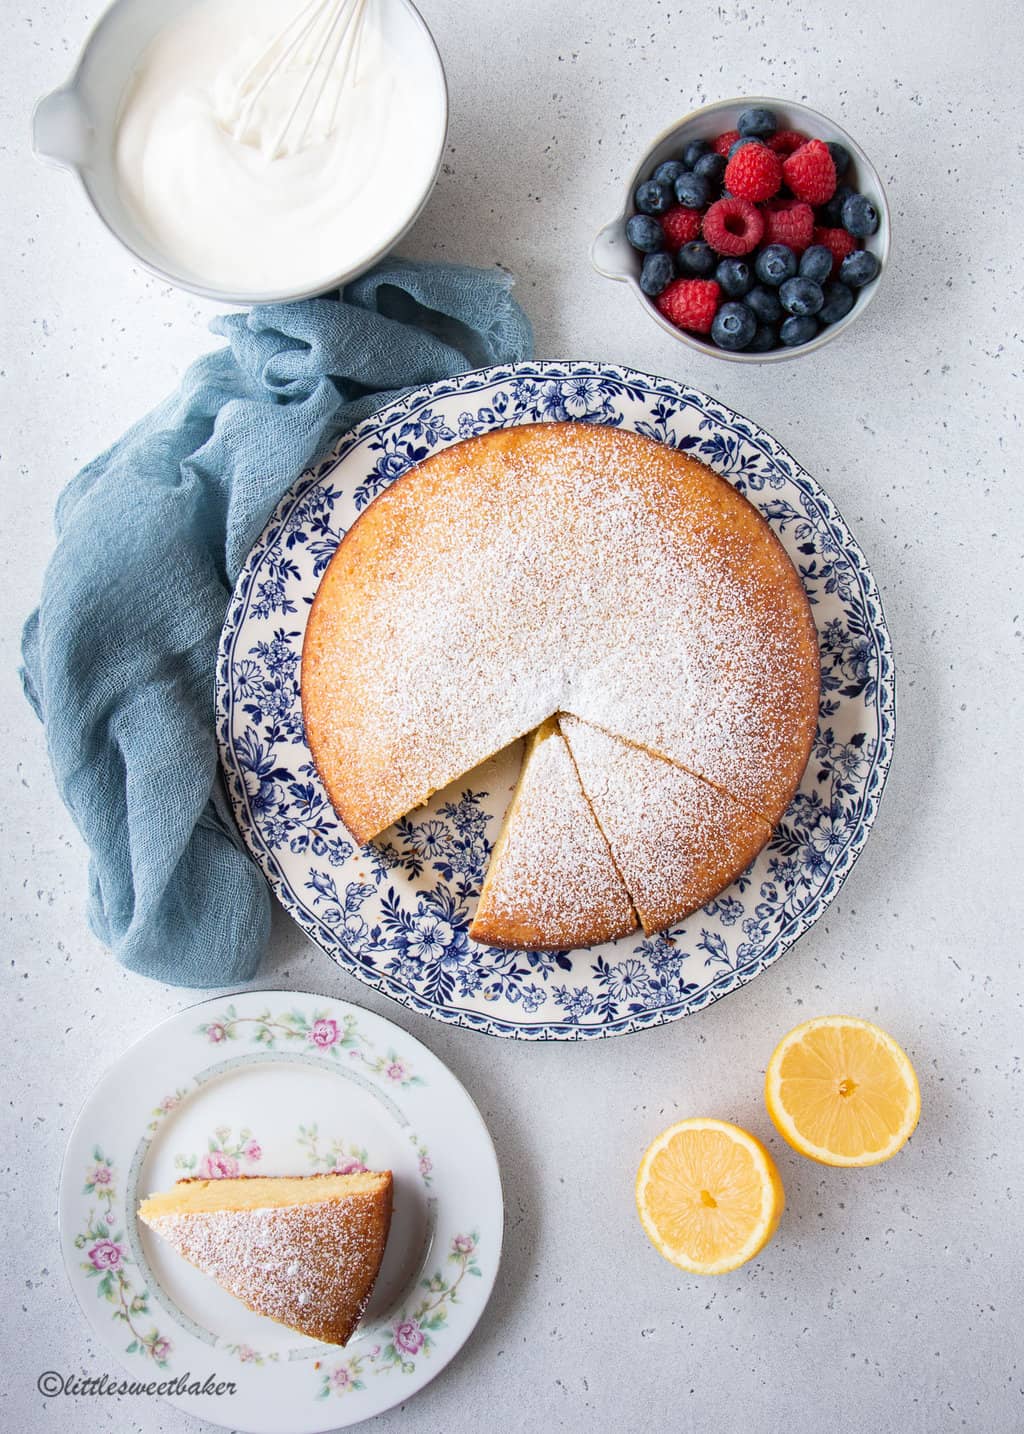 A lemon olive oil cake on a blue and white plate surrounded by a lemon, bowl of whipped cream, and blue cloth.